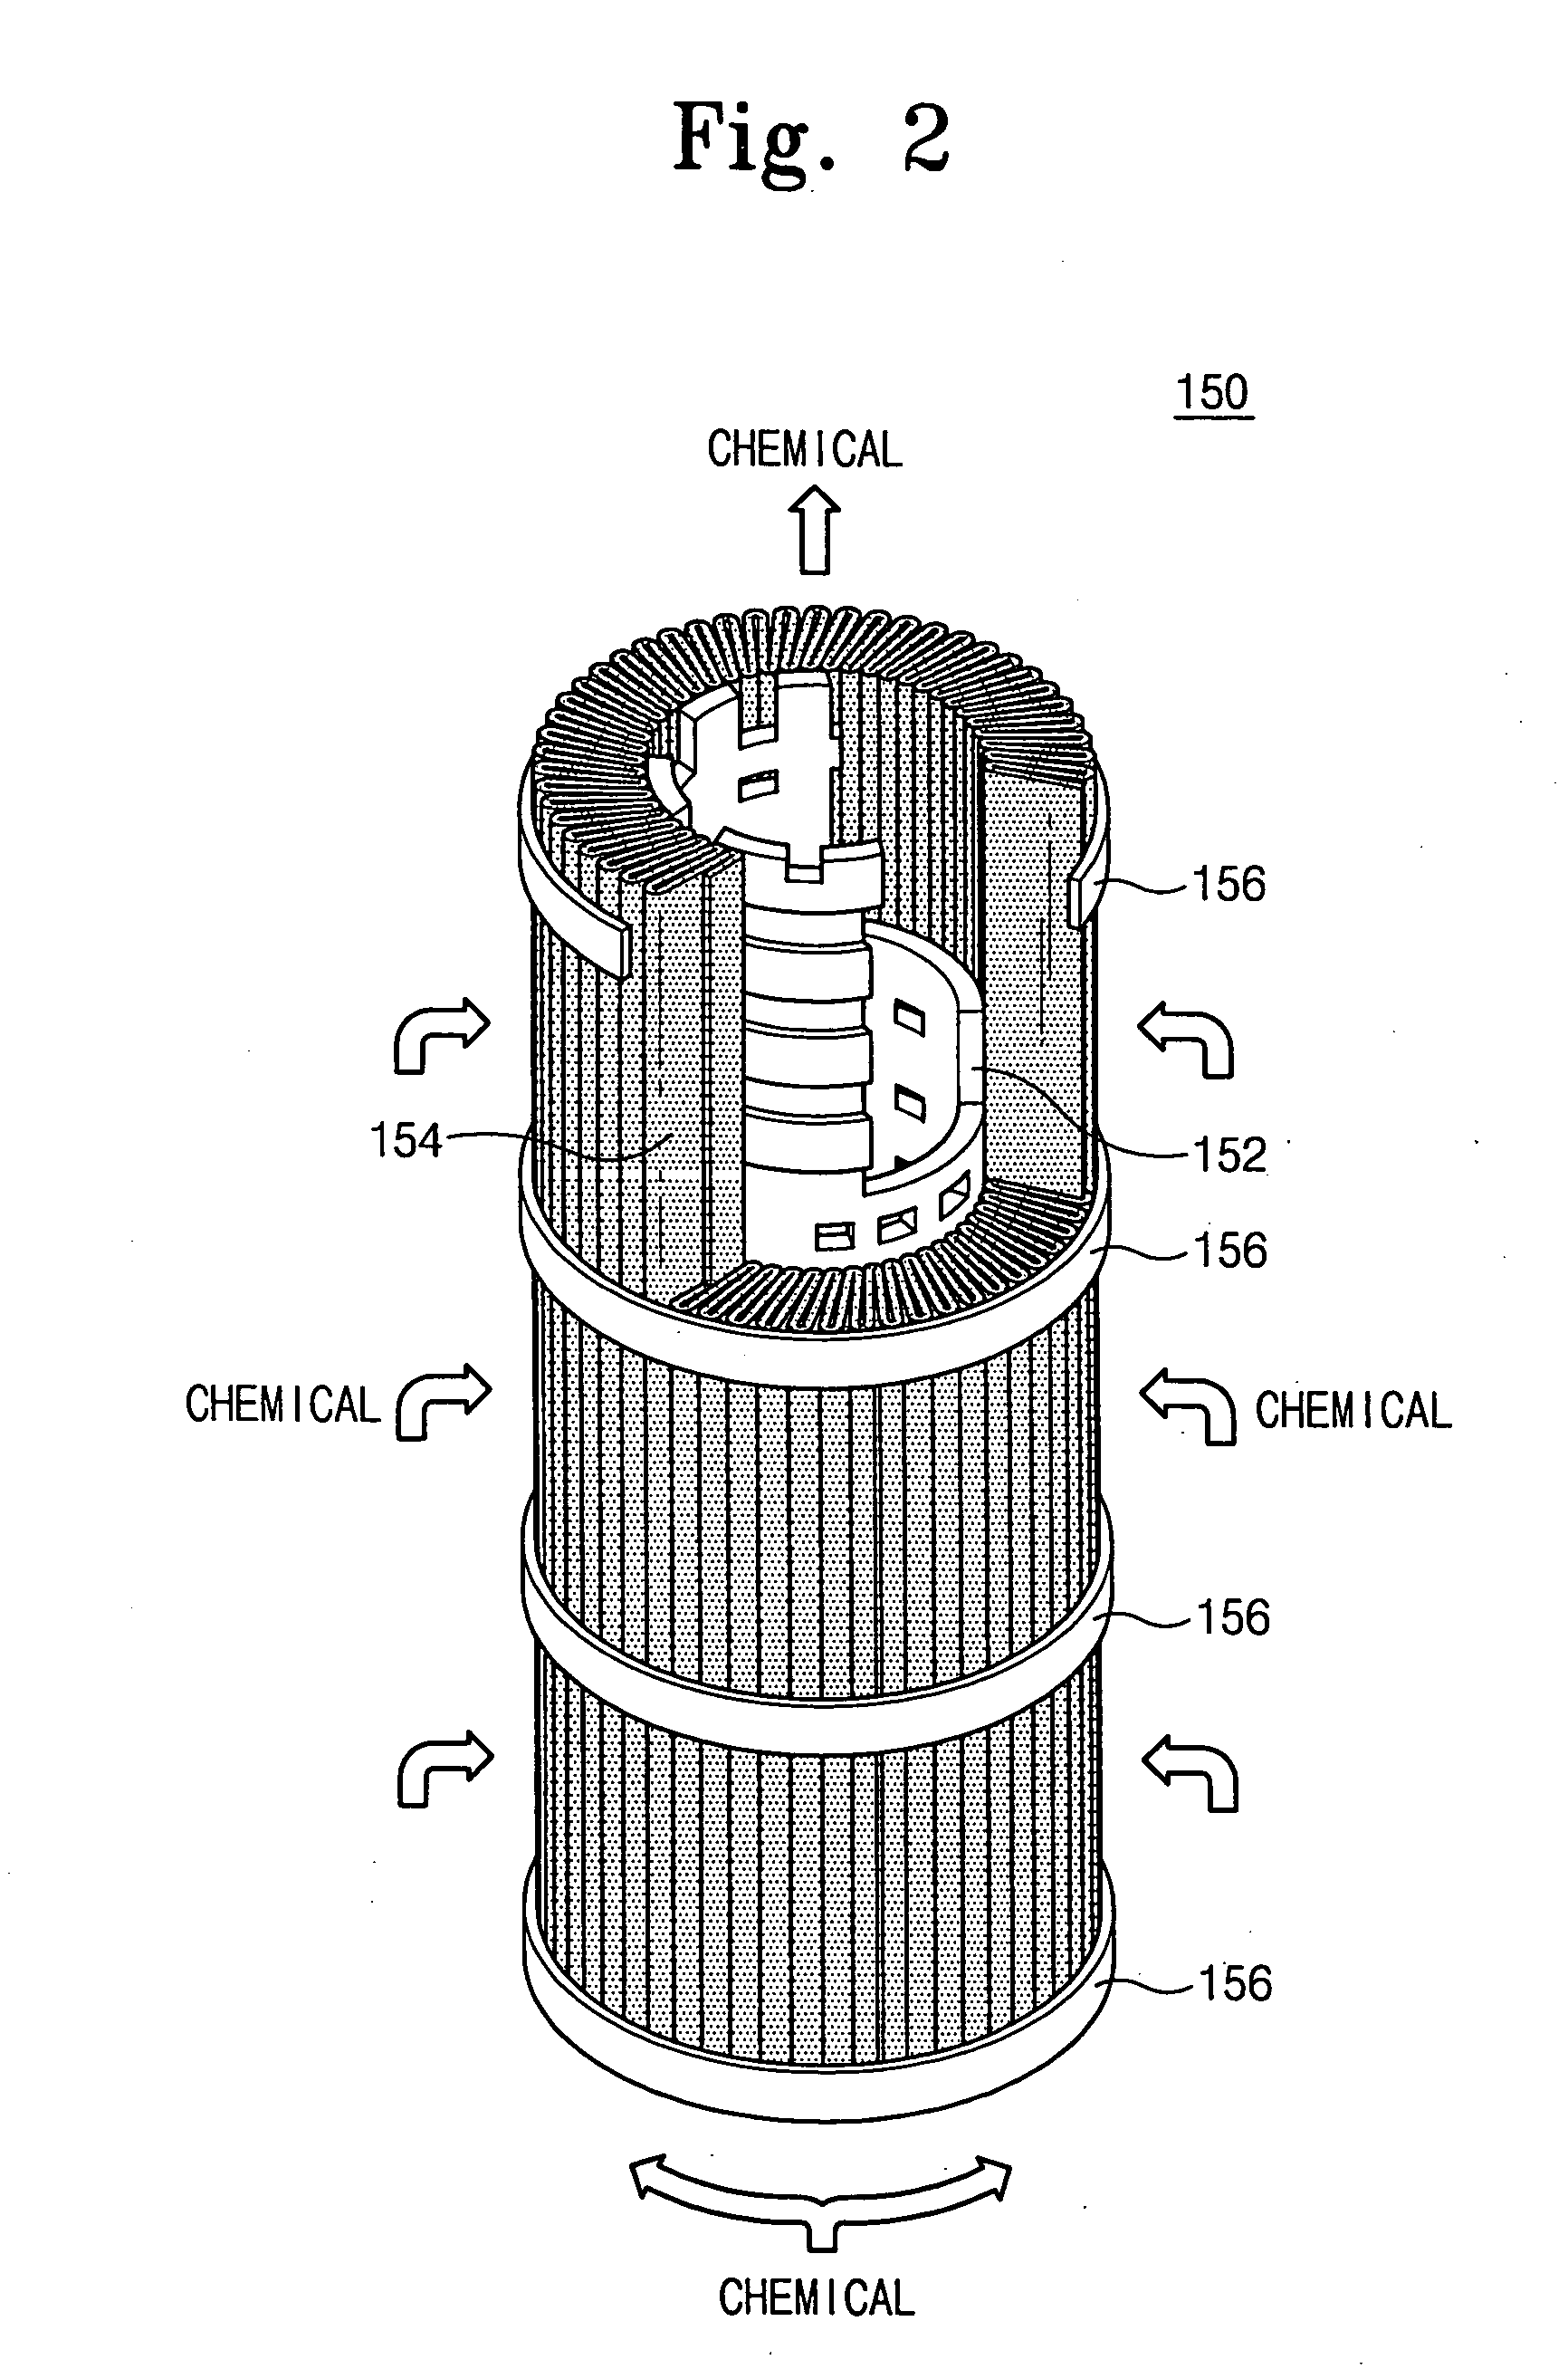 Chemical filter unit